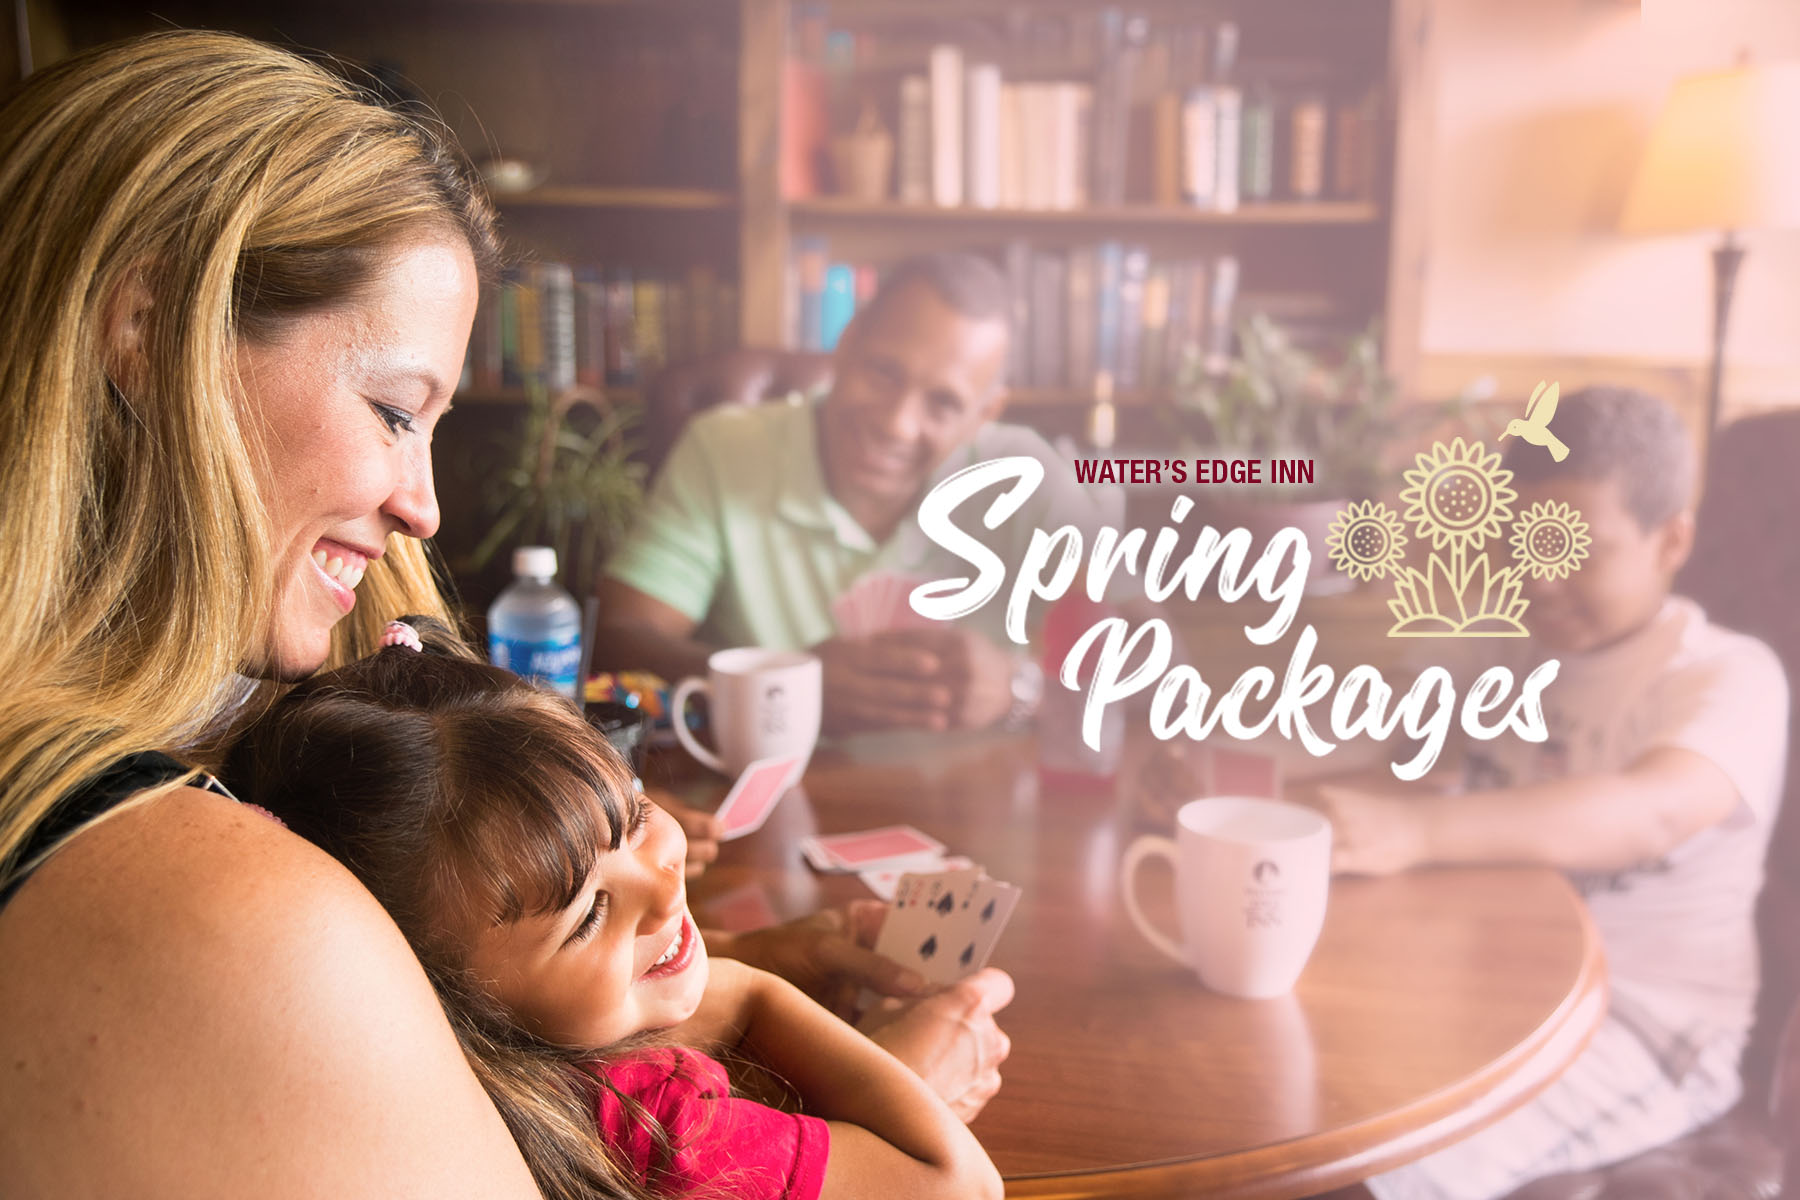 SAVE with Spring Packages!